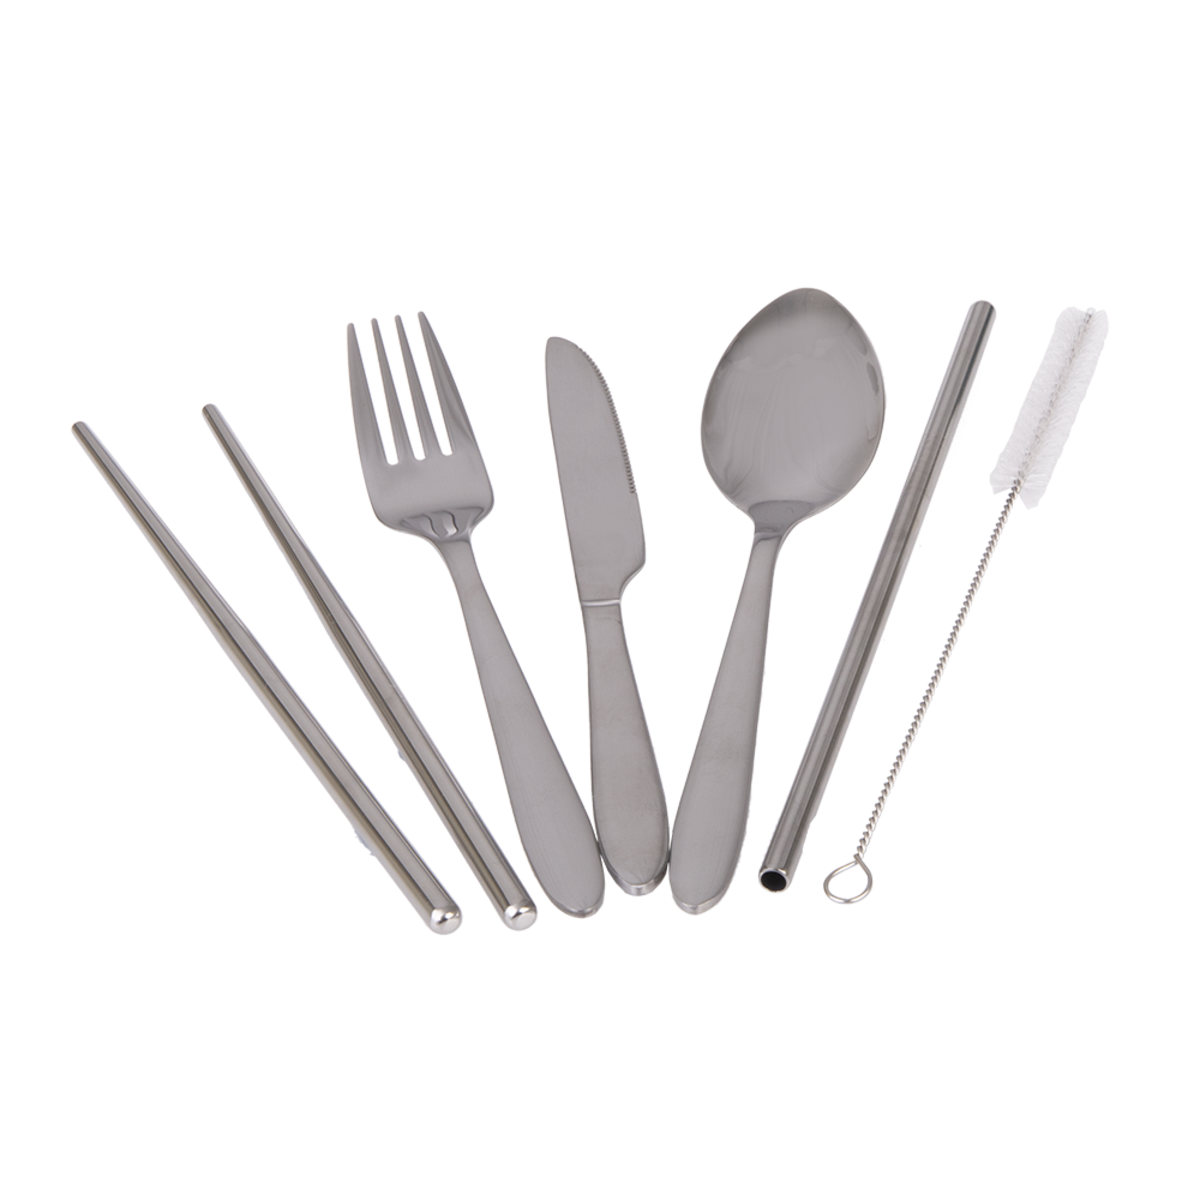 APPETITO 6 PIECE STAINLESS STEEL TRAVELLER'S CUTLERY SET - SILVER